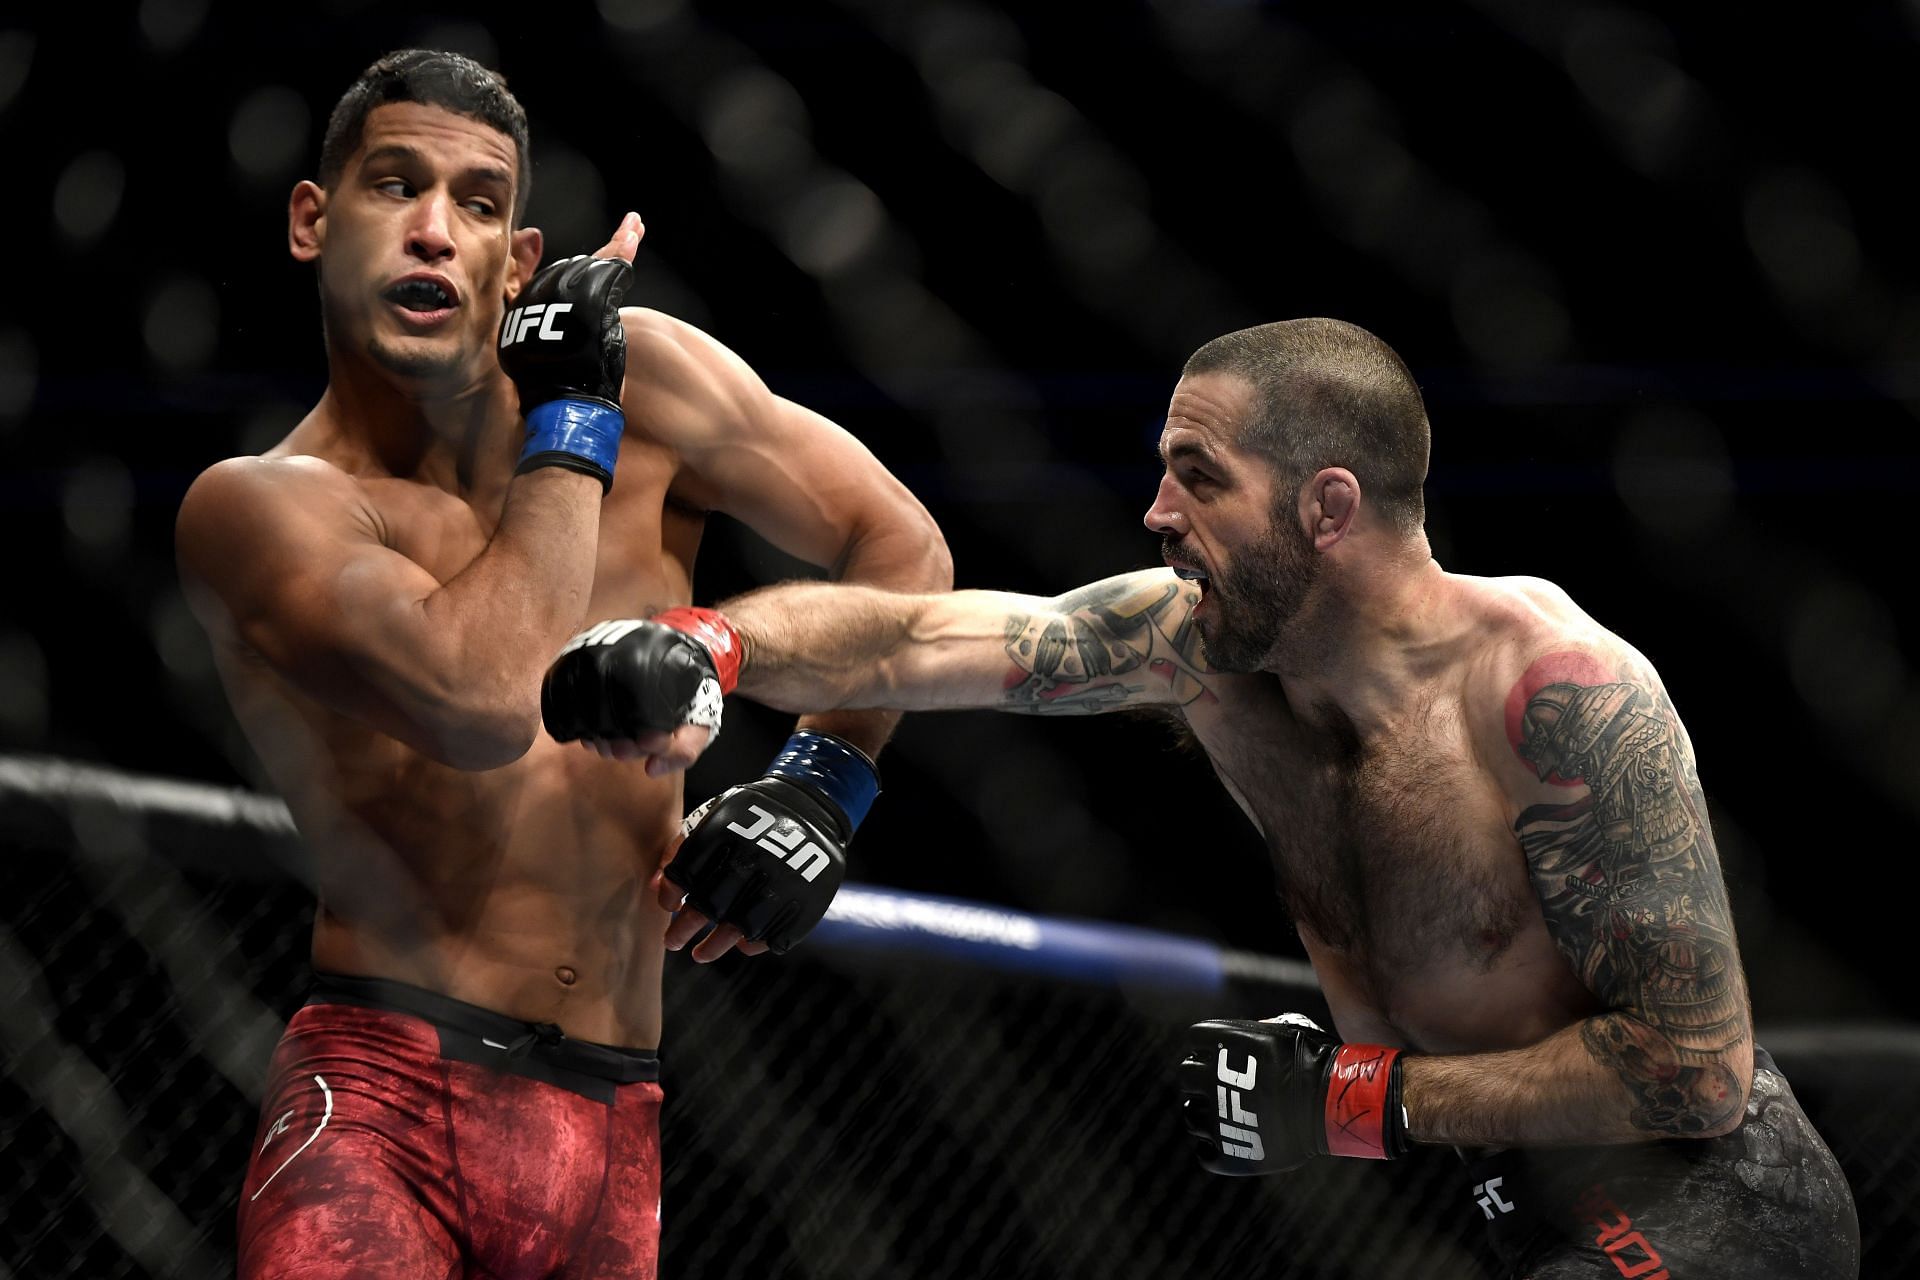 UFC Fight Night: Brown(right) attempting to strikes Baeza